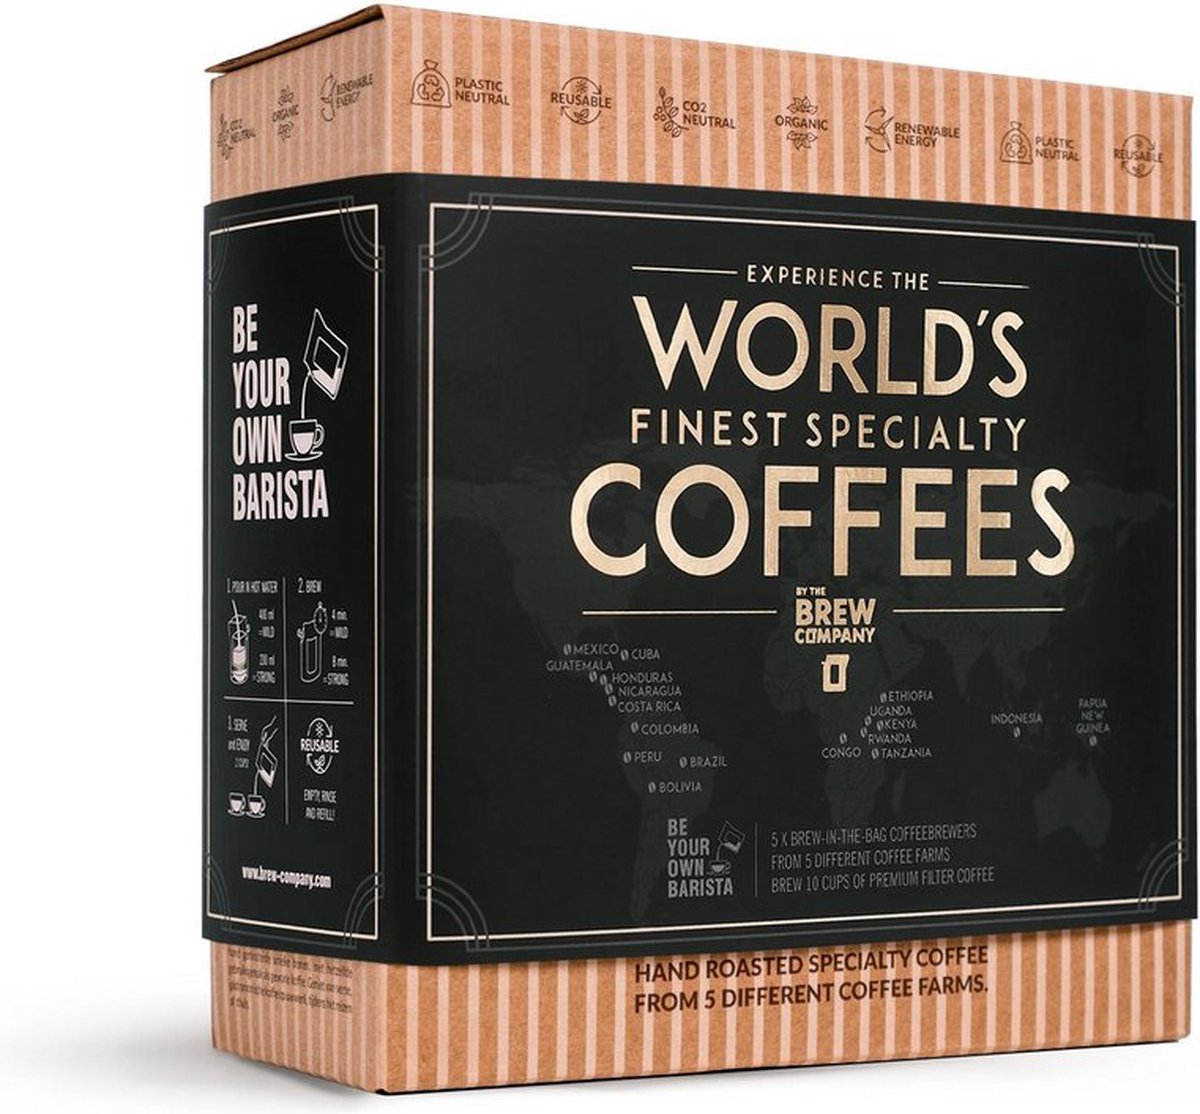 The Brew Company - Koffie - World's Best Coffees